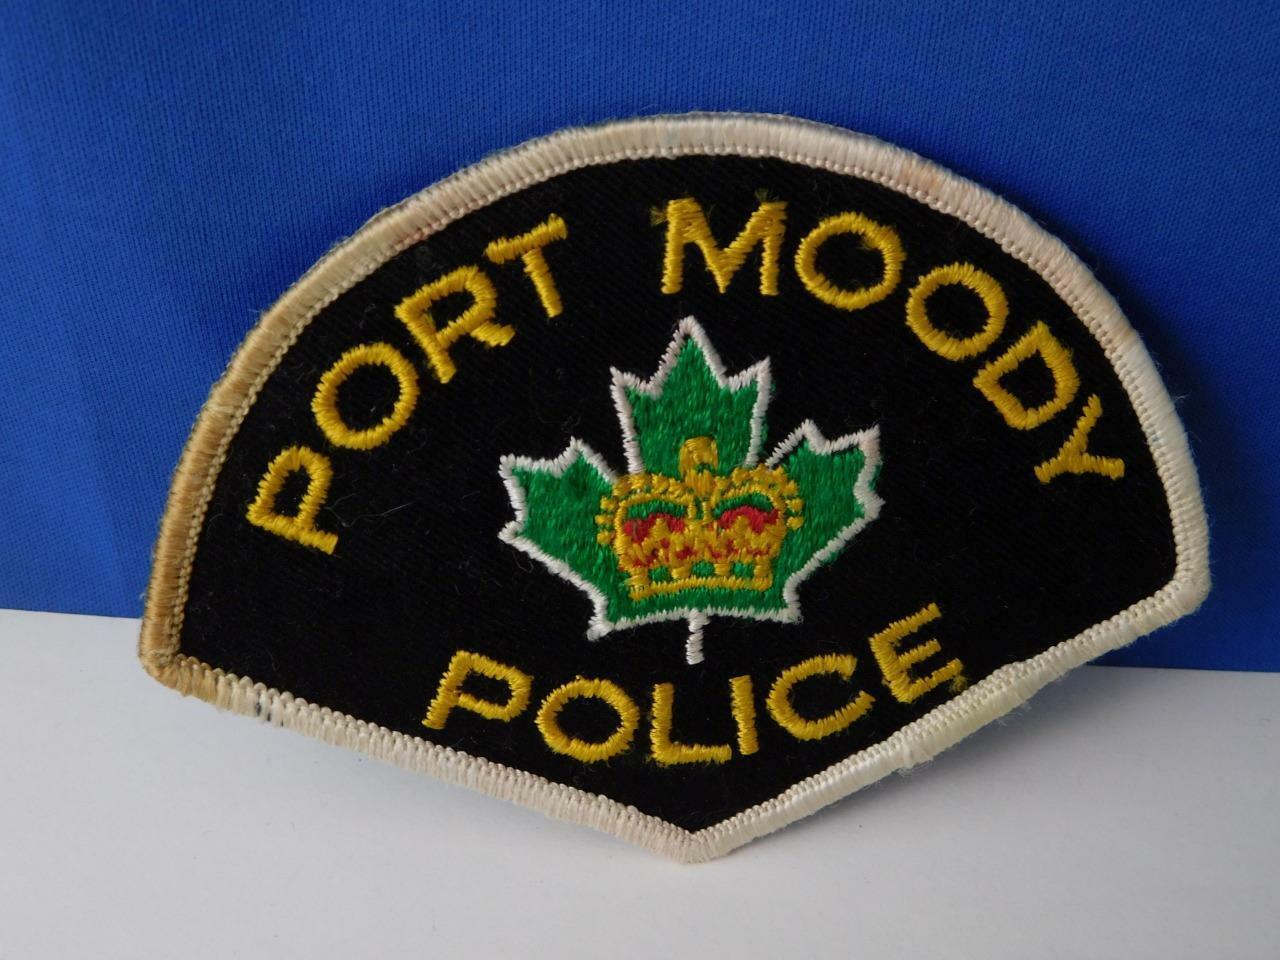 Port Moody Police Officer Vintage Obsolete Patch Badge  British Columbia Canada